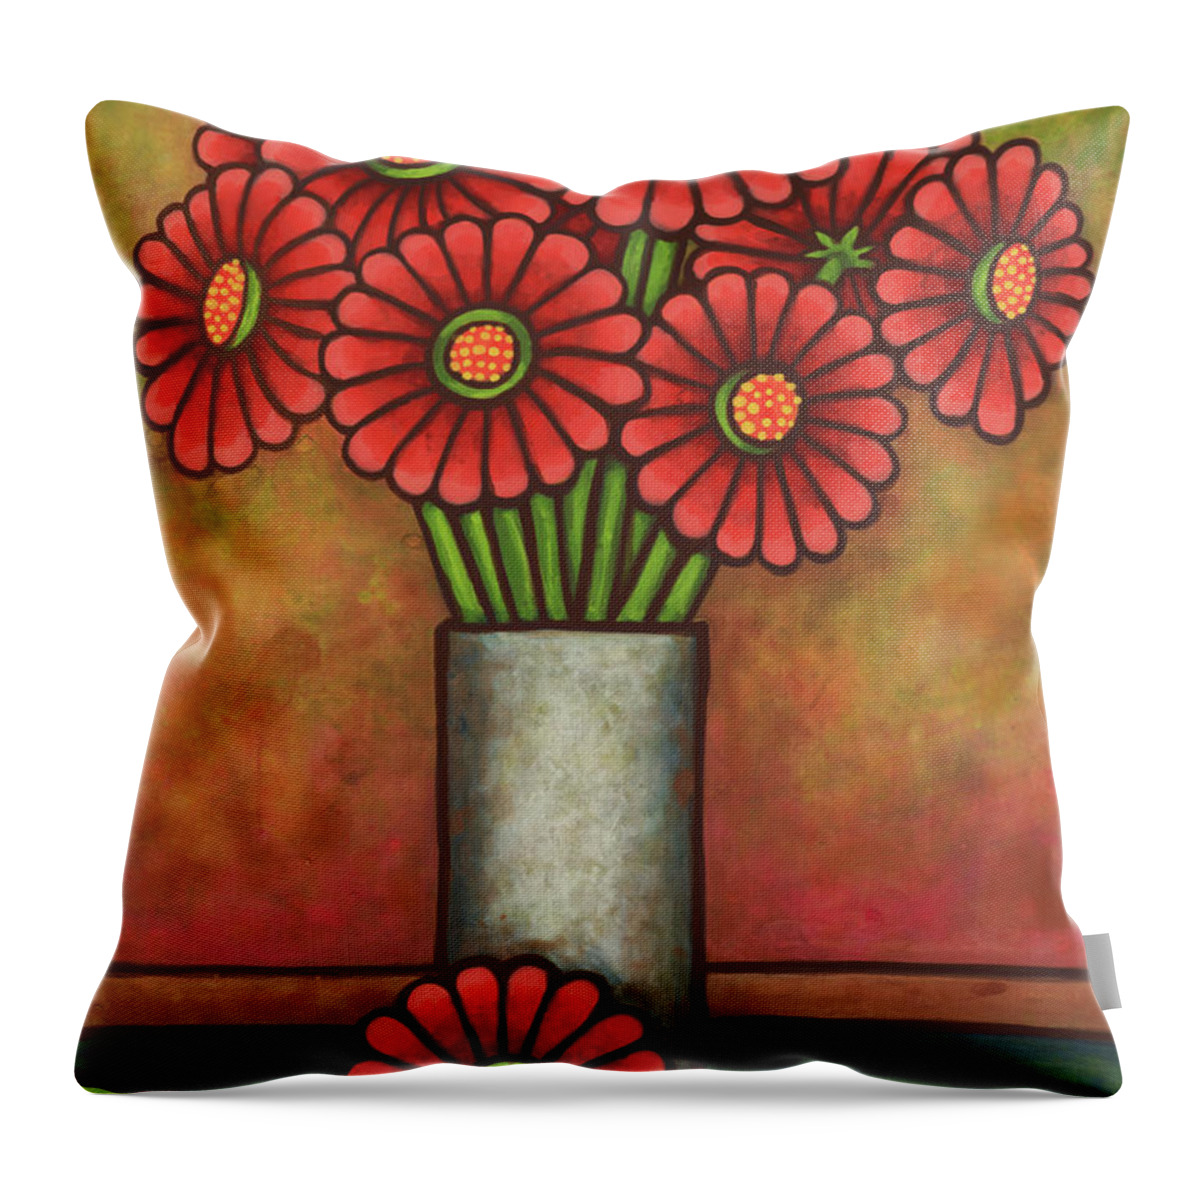 Vase Of Flowers Throw Pillow featuring the painting Floravased 22 by Amy E Fraser